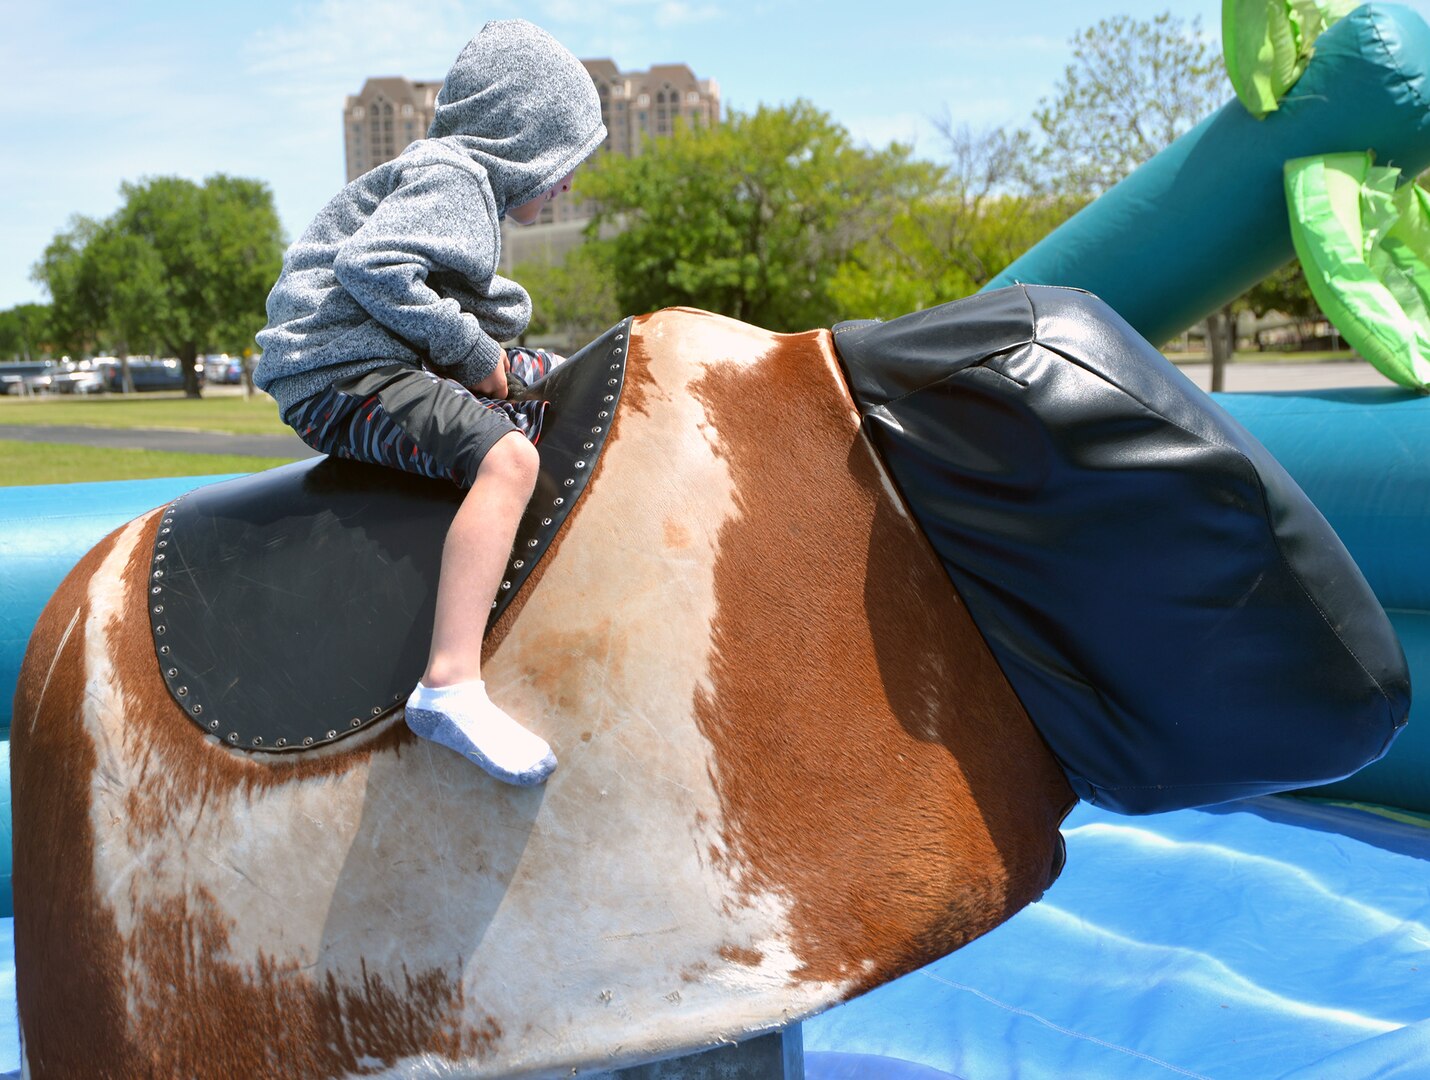 A young would-be bull rider clings on for dear life on a mechanical bull during the annual Cowboys and Heroes event held at MacArthur Parade Field at Joint Base San Antonio-Fort Sam Houston April 14.